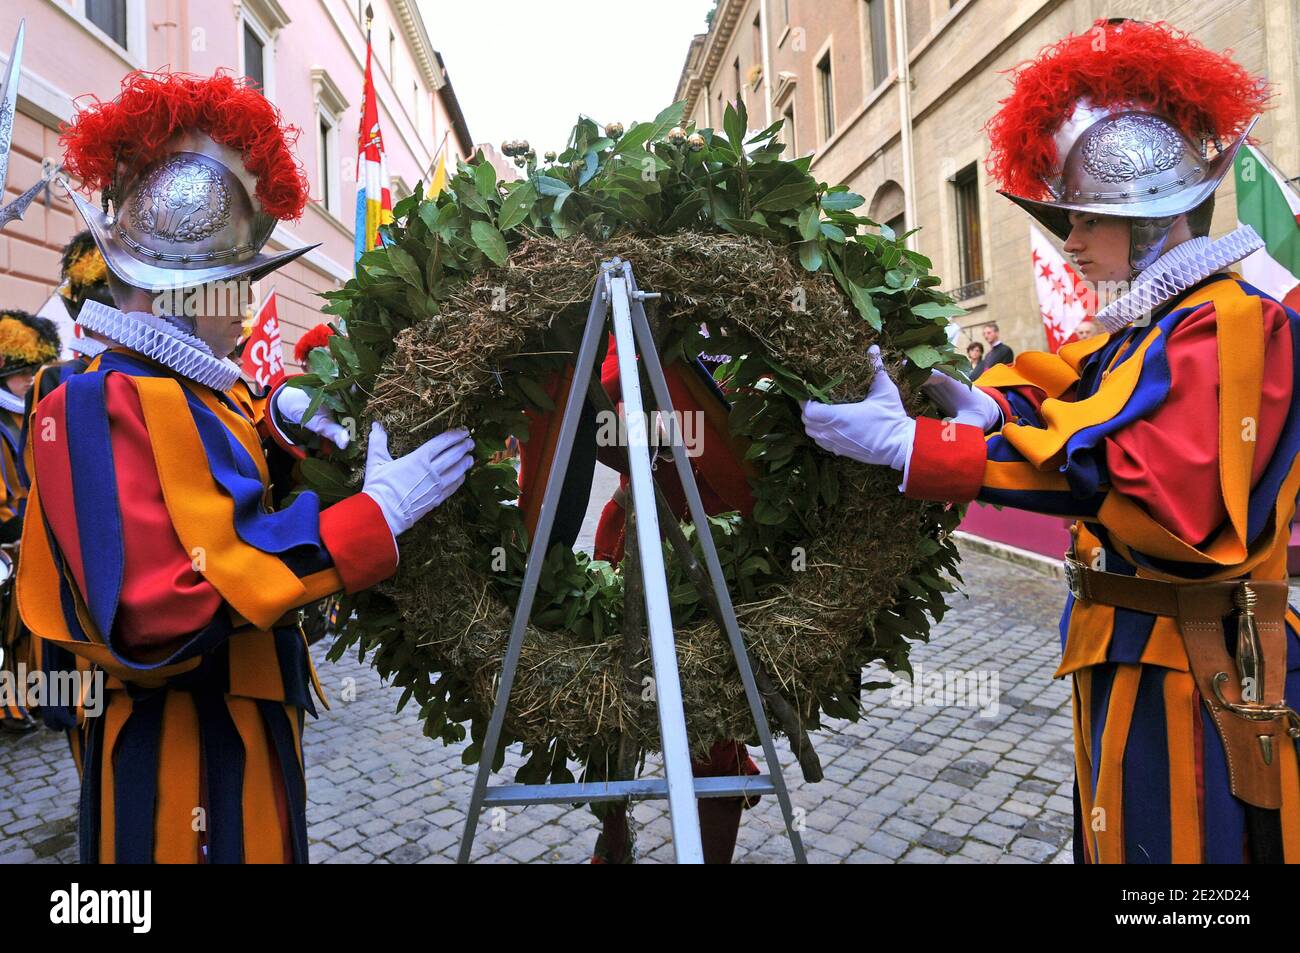 Vatican Swiss Guards commemorate the 1527 Sack of Rome, in the courtyard of the headquarters of the Swiss Guards, at the Vatican on May 6, 2010. The ceremony is held each May 6 to commemorate the 147 Swiss Guards who died protecting Pope Clement VII during the 1527 Sack of Rome carried out by the mutinous troops of Charles V, Holy Roman Emperor. Photo by ABACAPRESS.COM Stock Photo